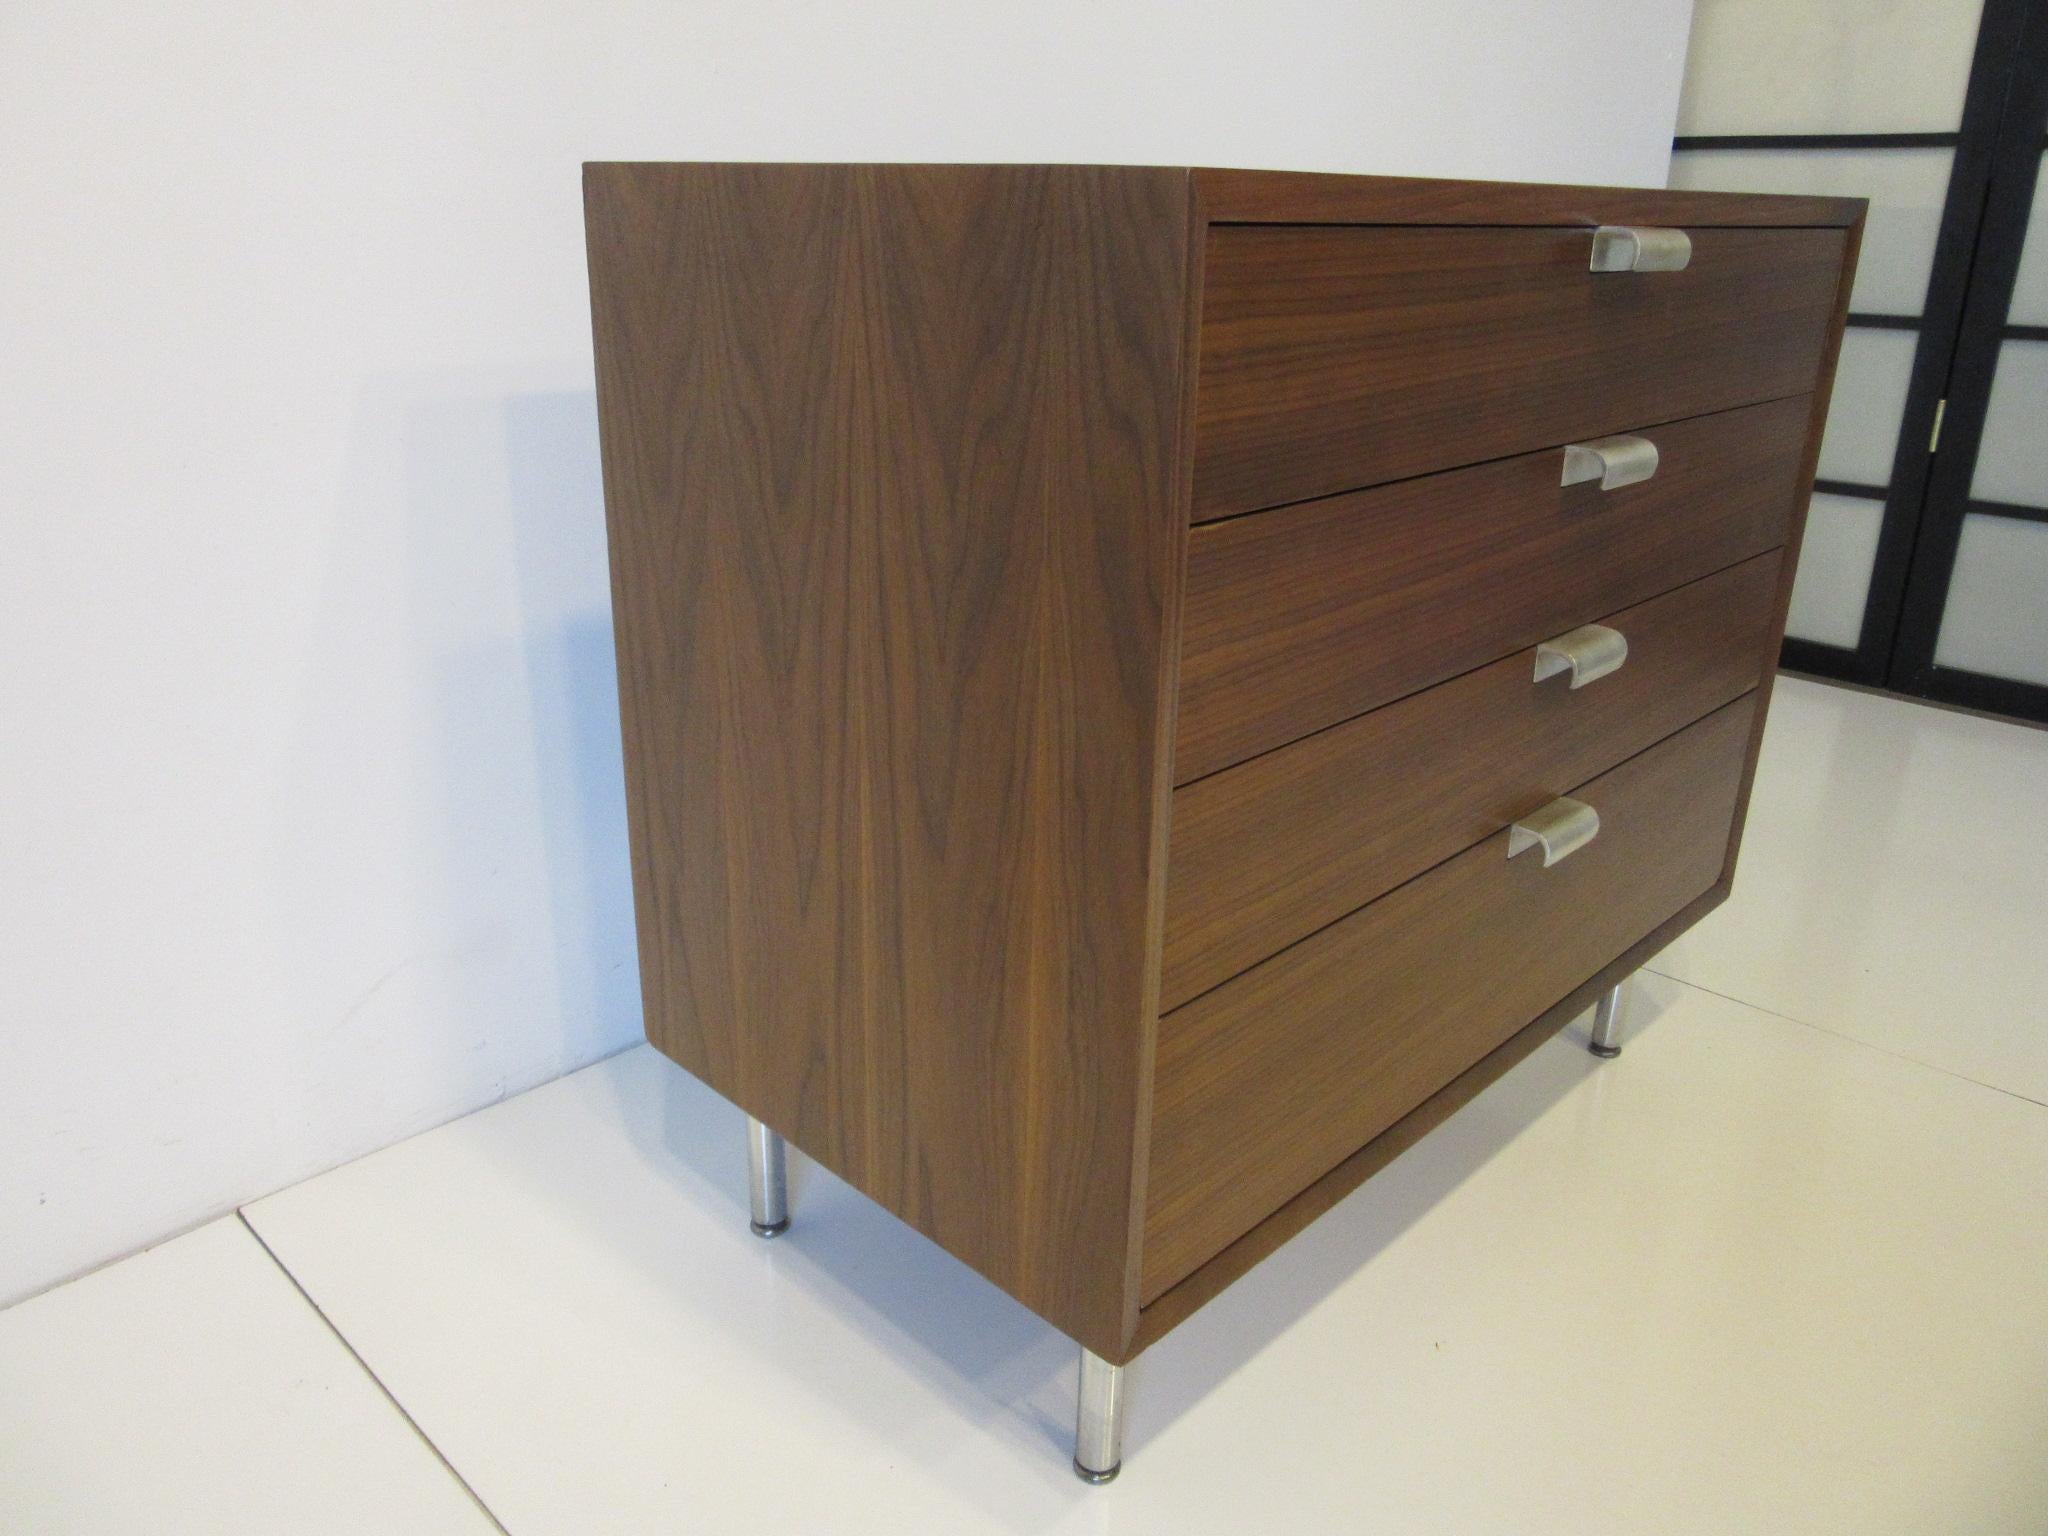 A beautiful medium toned walnut chest / dresser with great gaining to the overall piece making it an eyecatcher, four-drawer with silver large J pulls and chrome tubular legs. Retains the original early foil labels from the Herman Miller Furniture